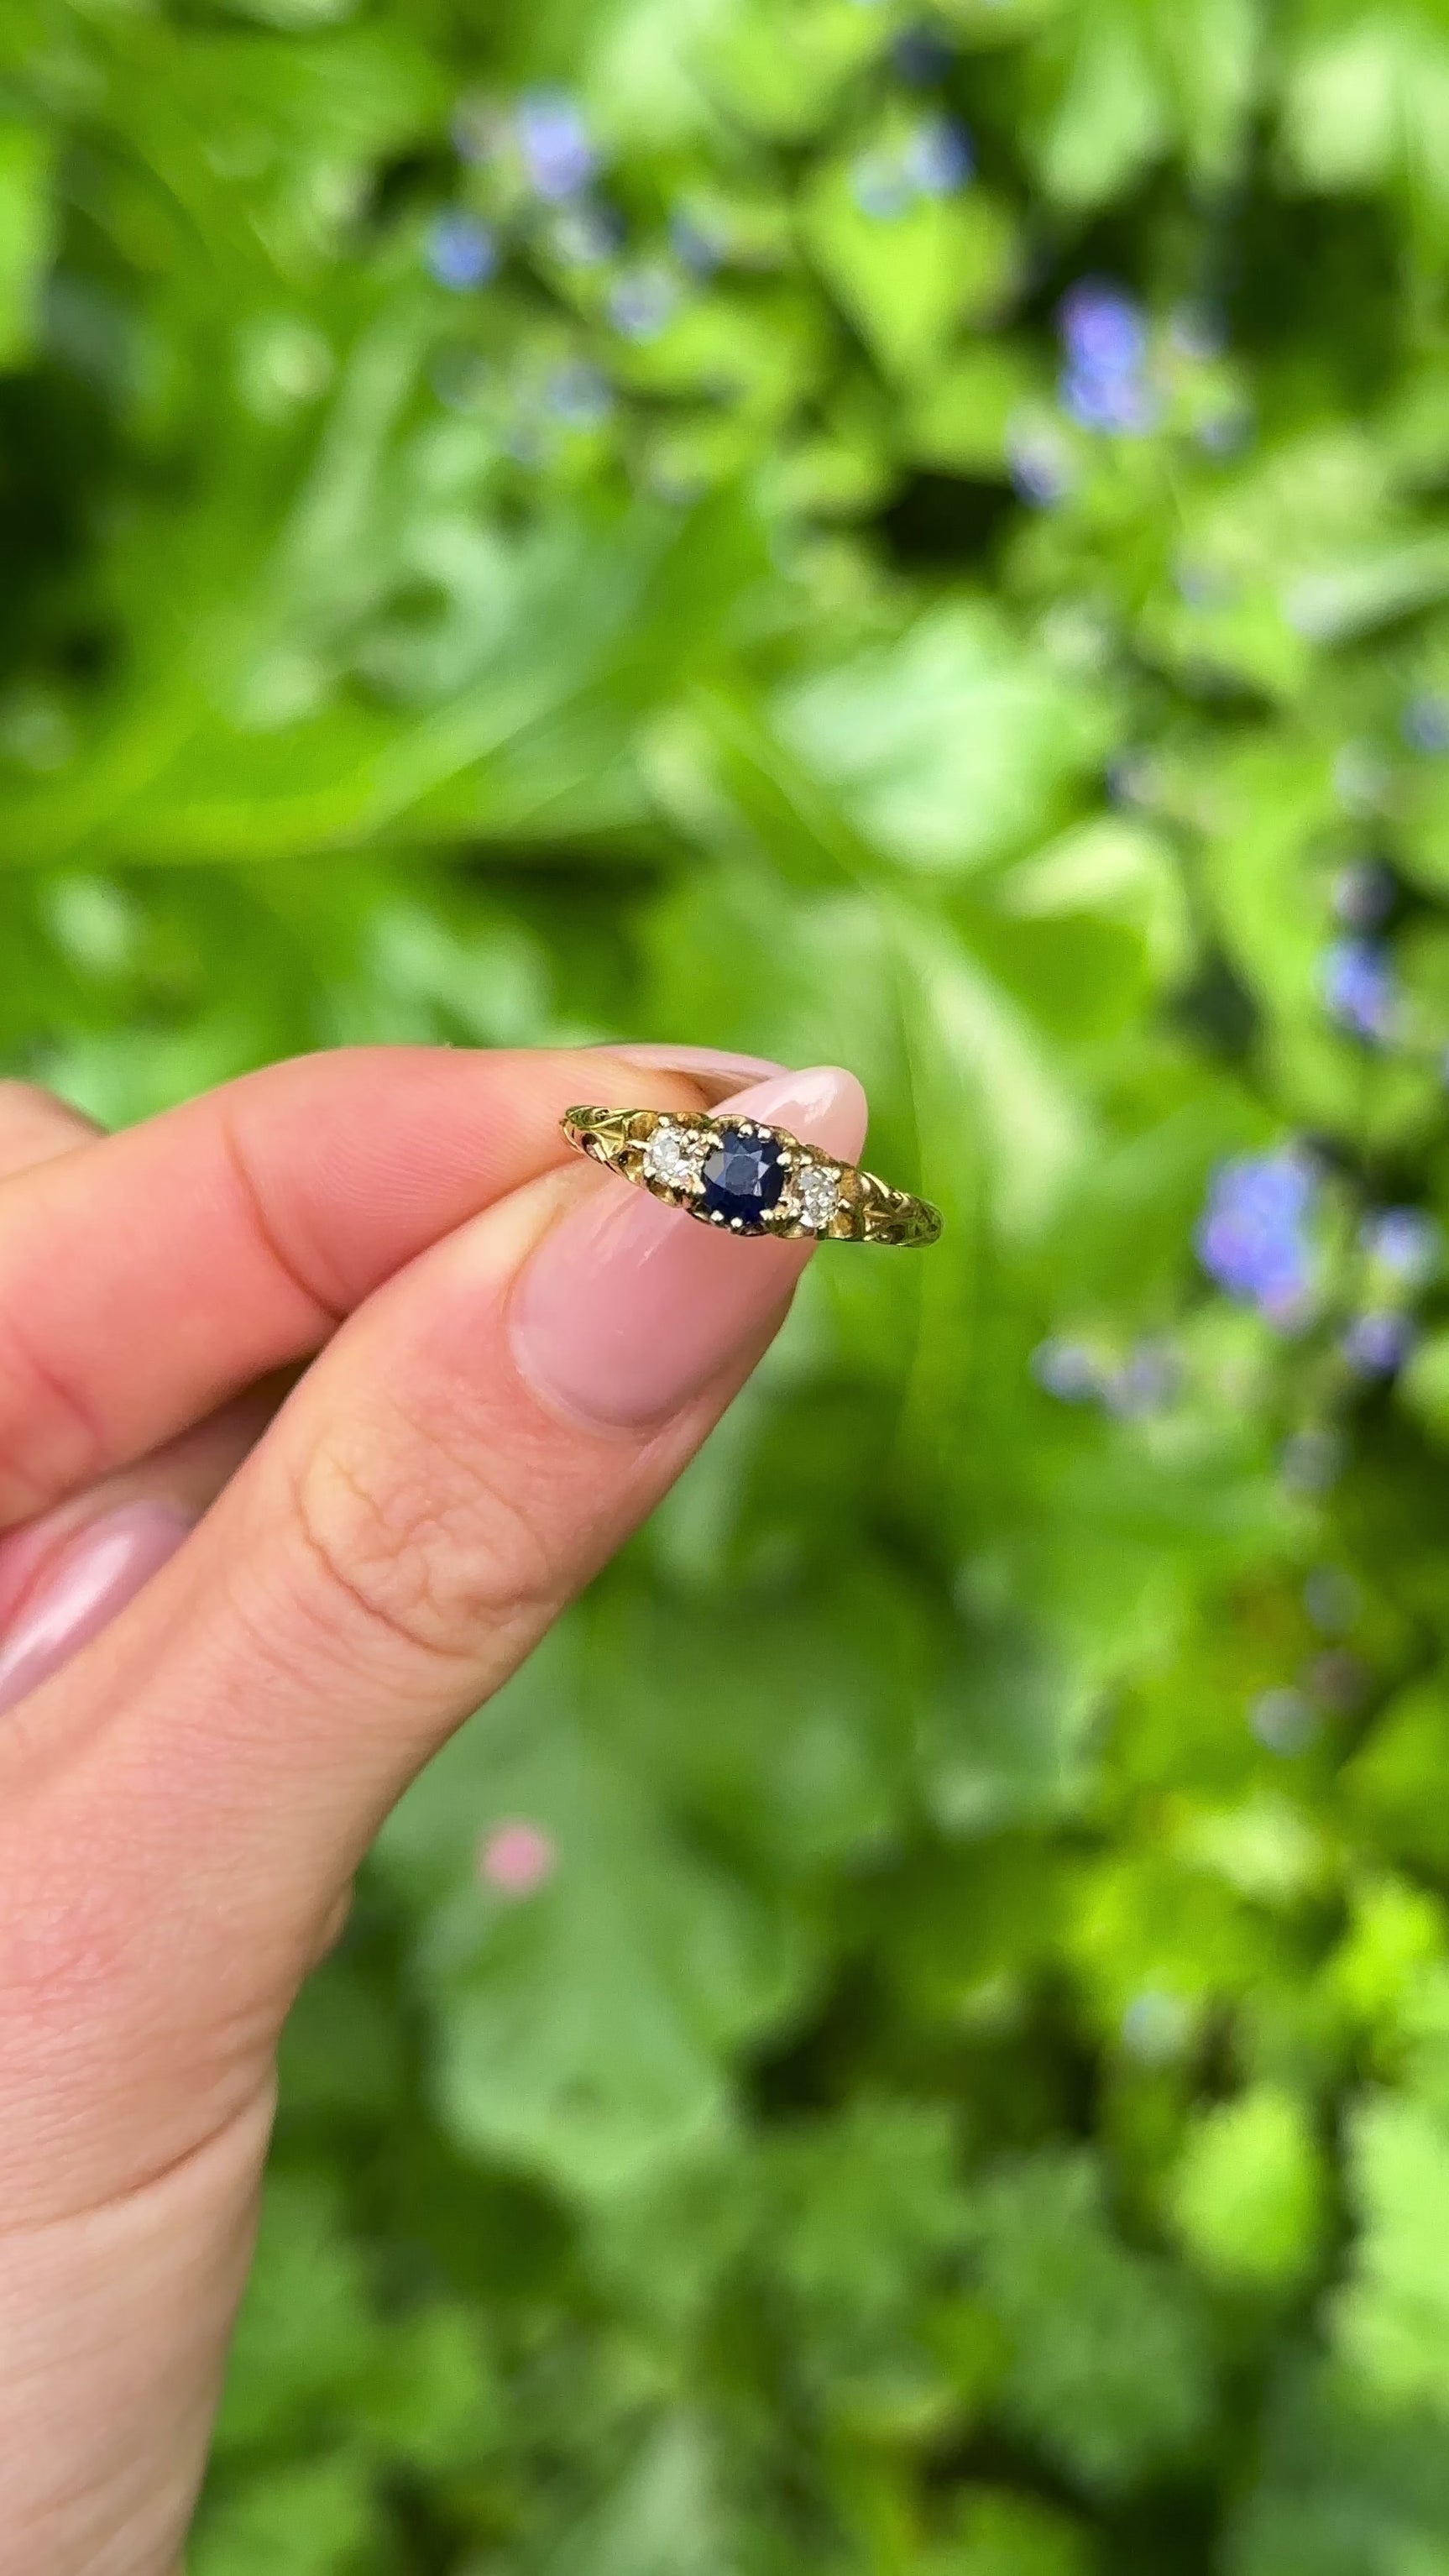 Antique, Edwardian Sapphire and Diamond Three-Stone Ring, 18ct Yellow Gold held in fingers.